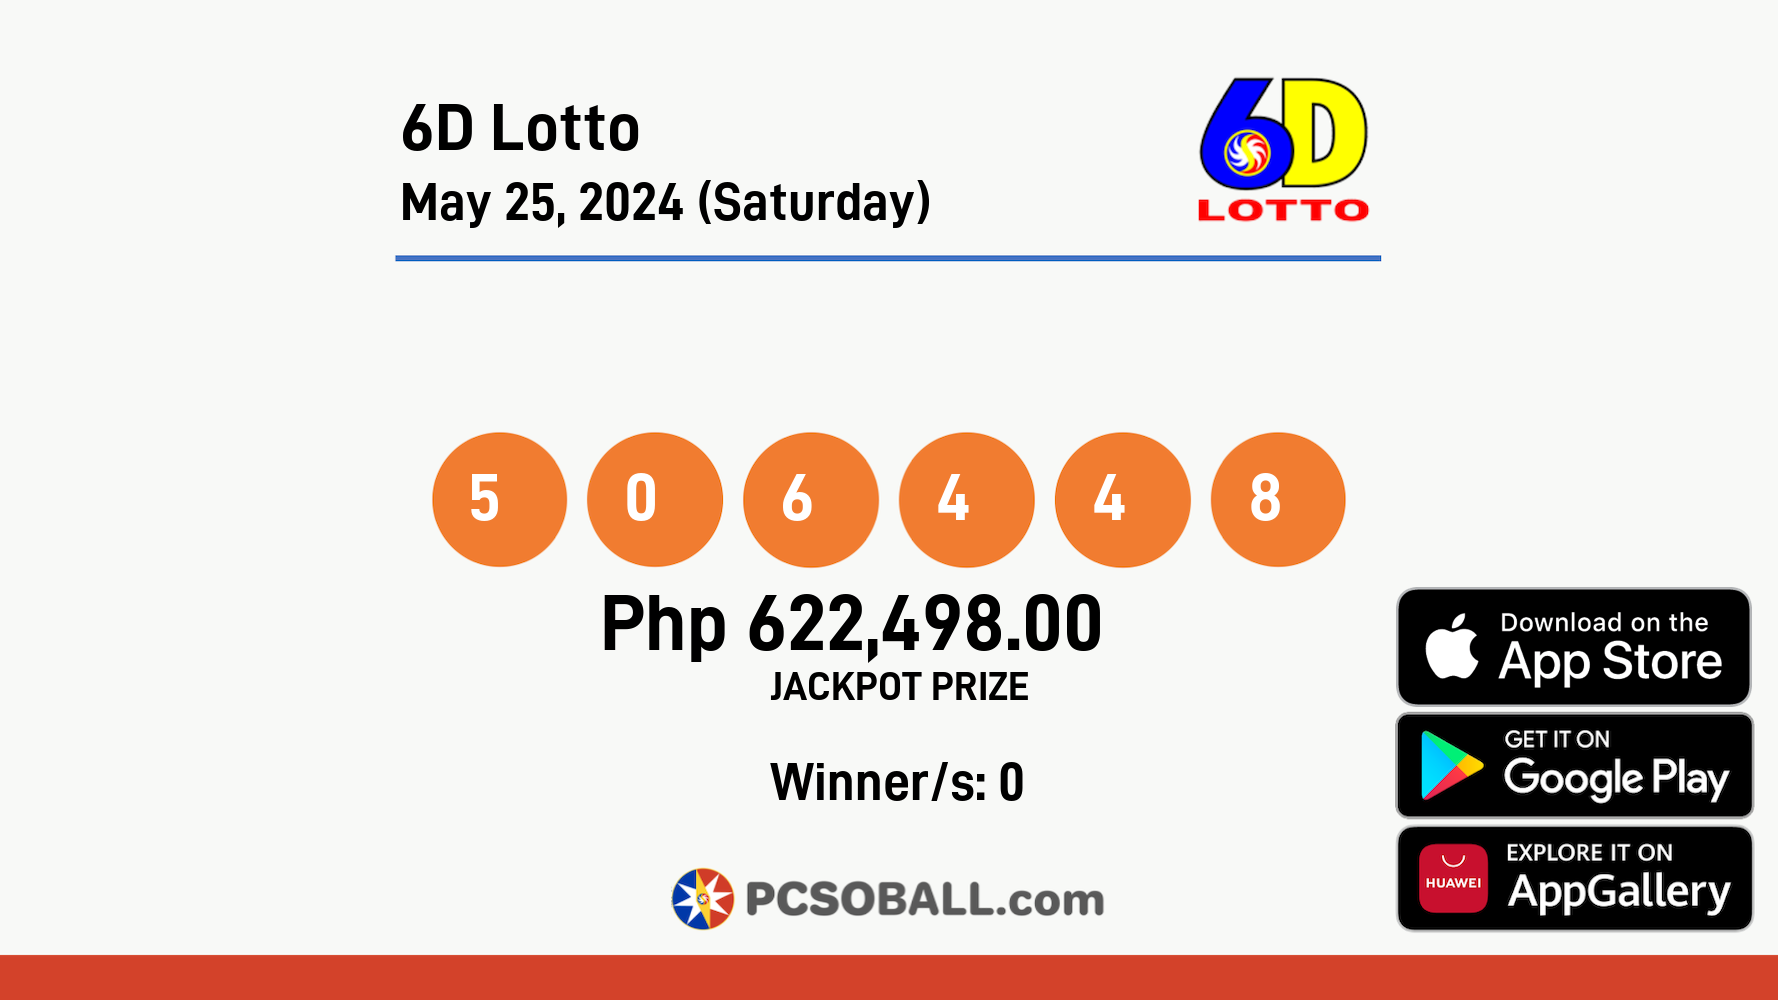 6D Lotto May 25, 2024 (Saturday) Result